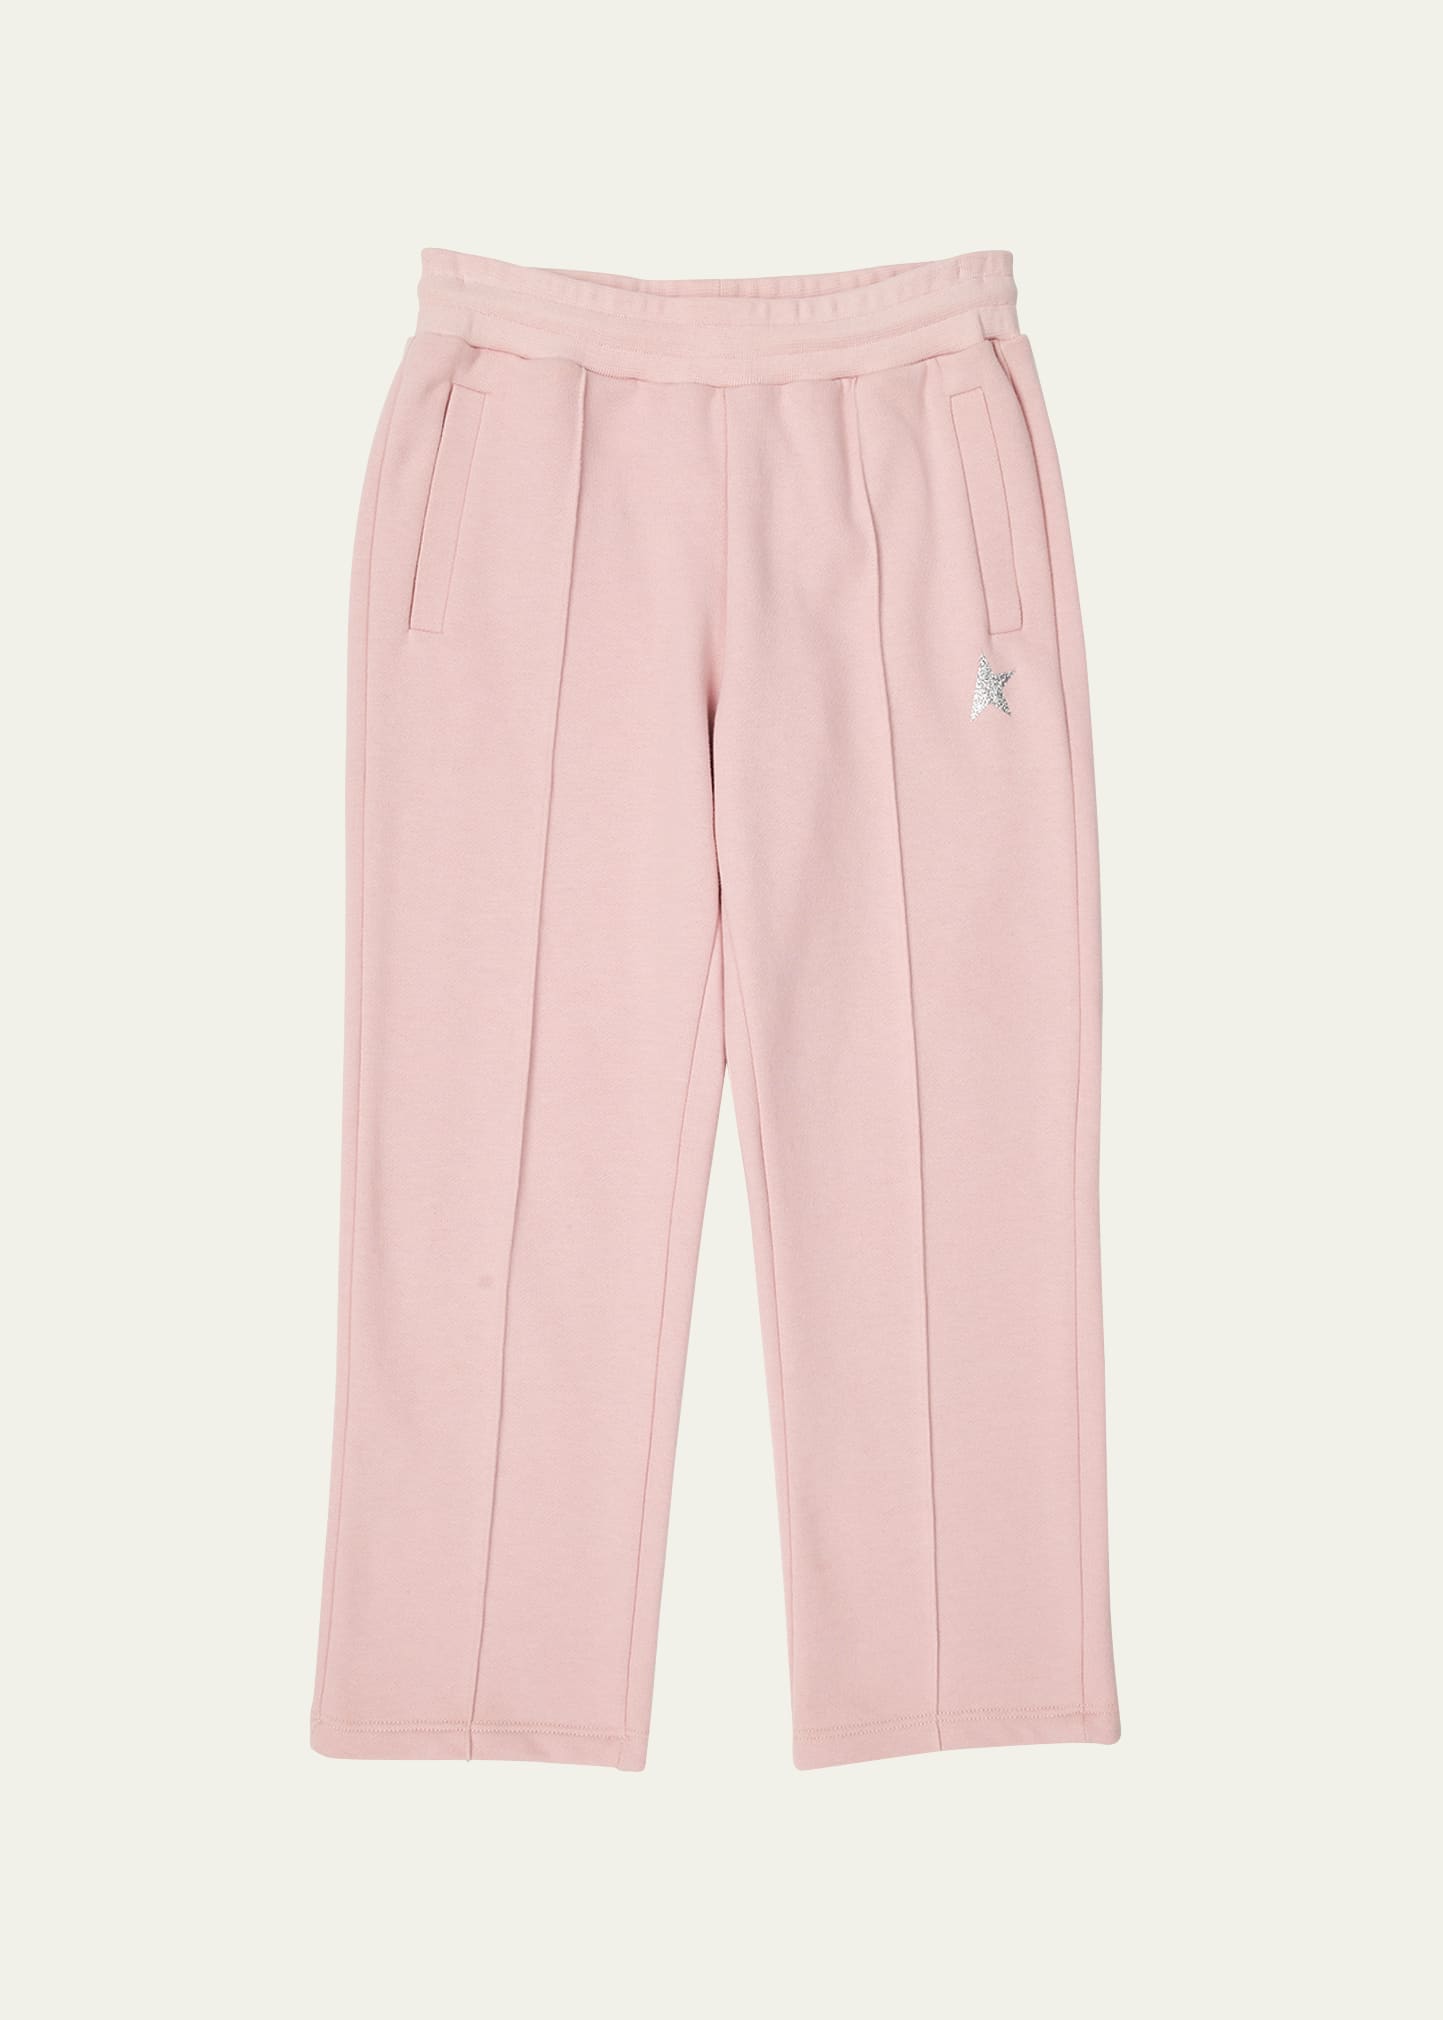 Golden Goose Kids' Girl's Paneled Star Joggers In Pink/silver